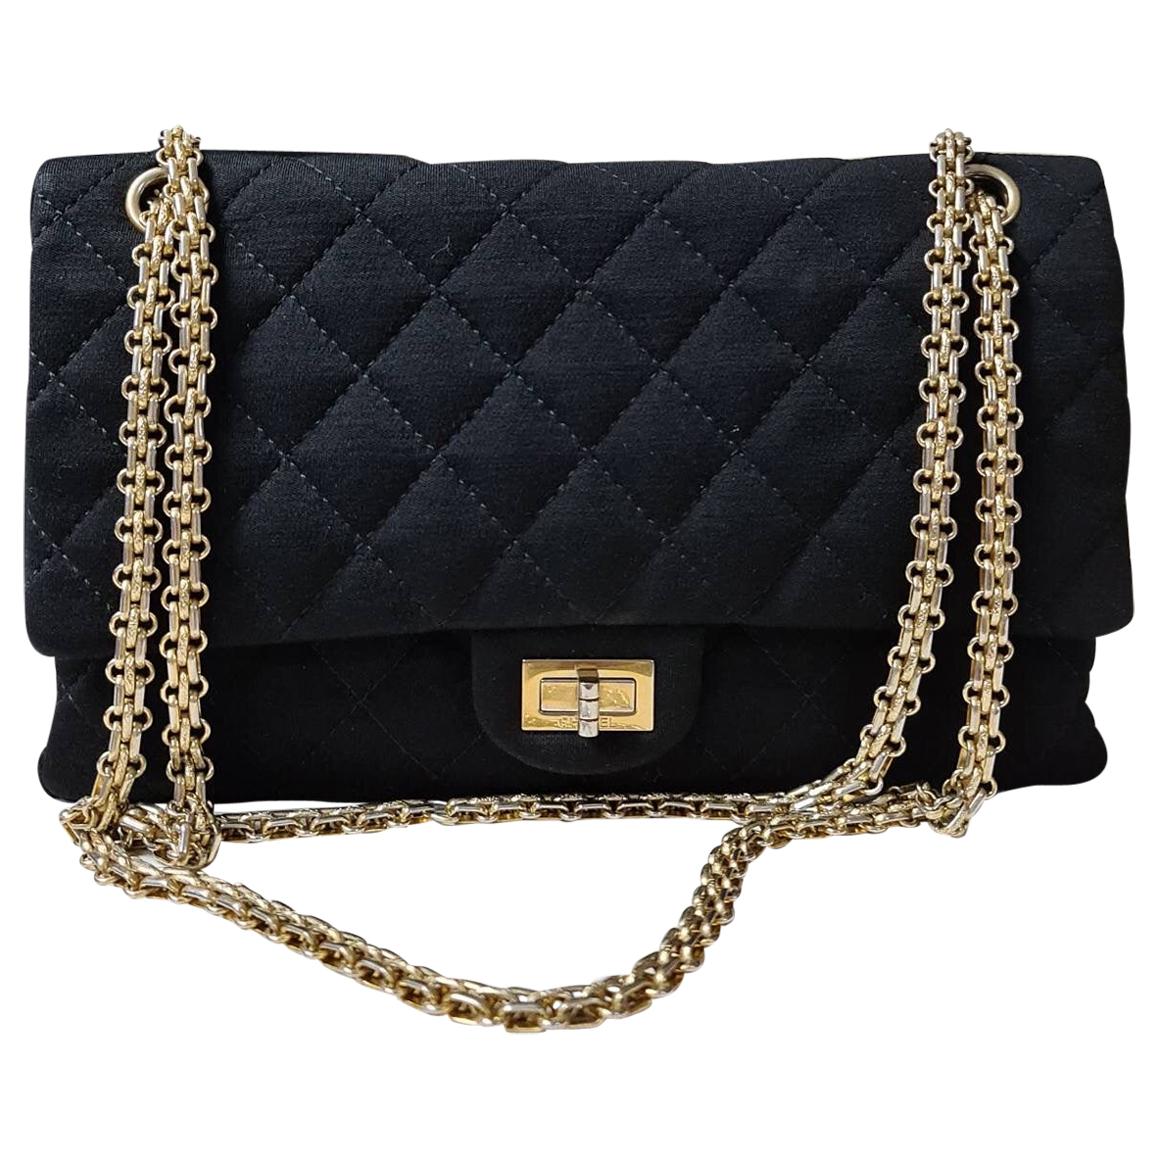 Chanel Black Quilted Jersey Fabric 2.55 Reissue  Double Flap Bag